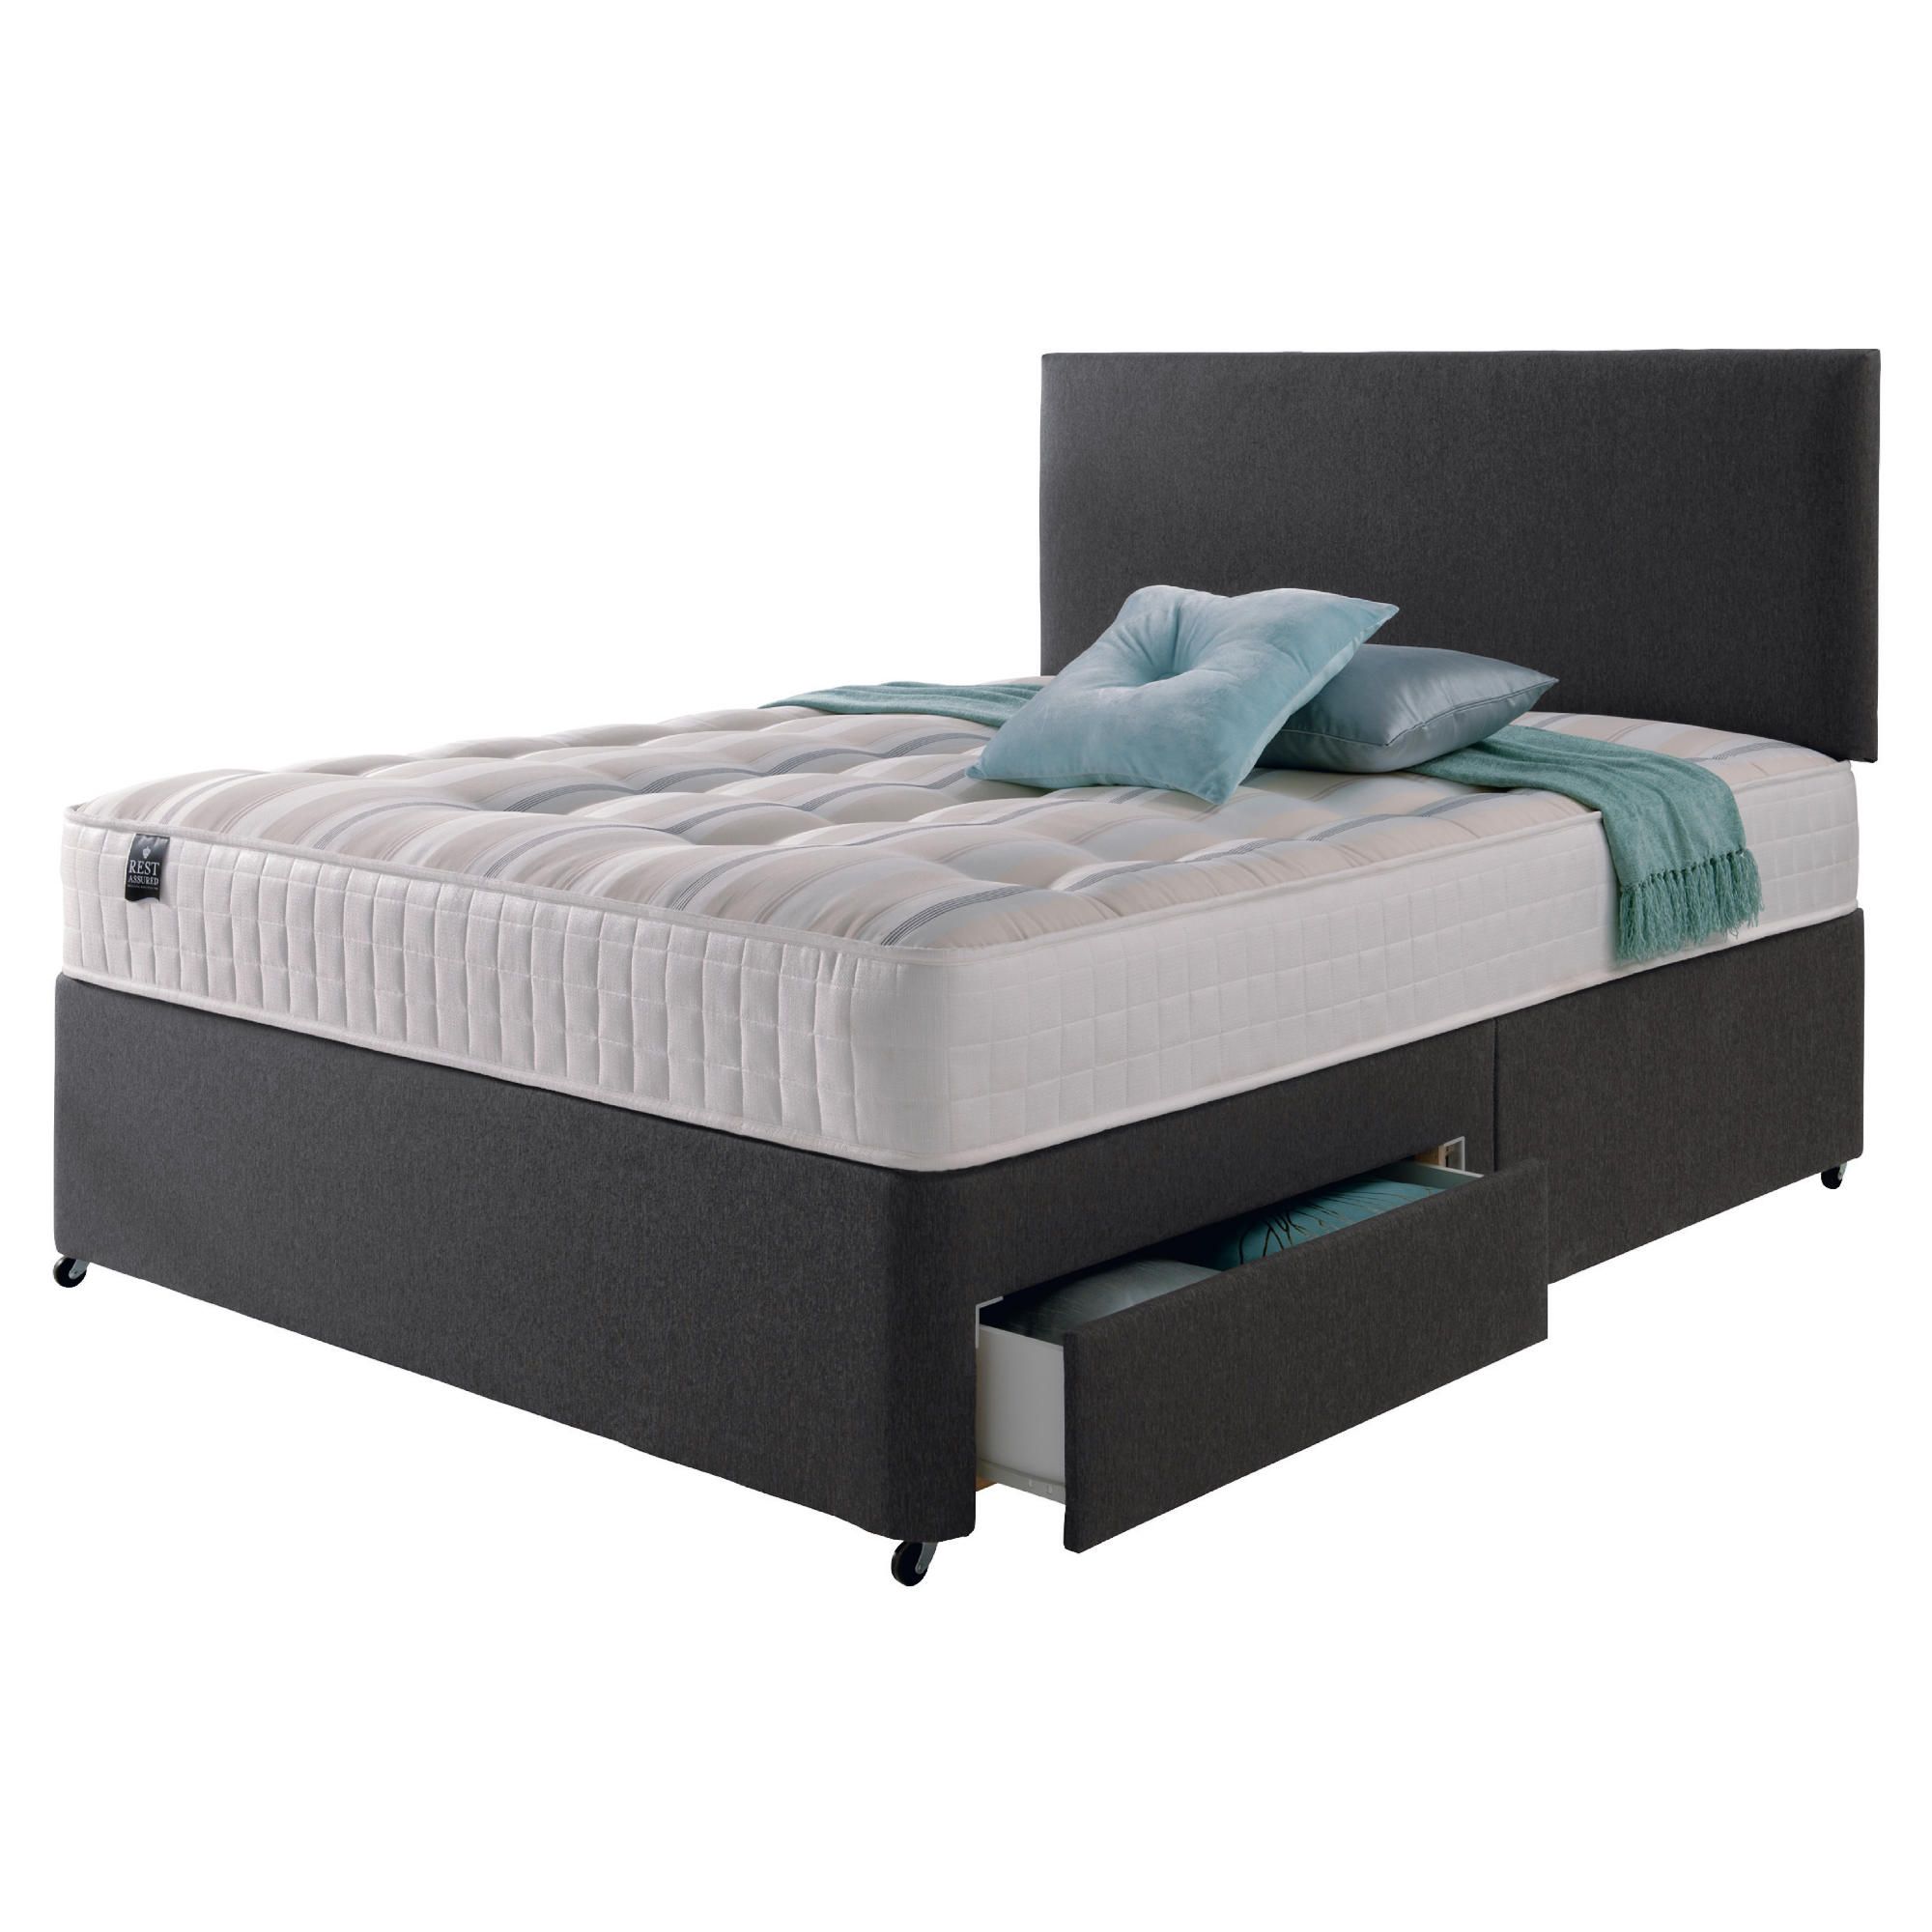 Rest Assured Ortho 4 Drawer Super King Divan and Headboard Charcoal at Tesco Direct